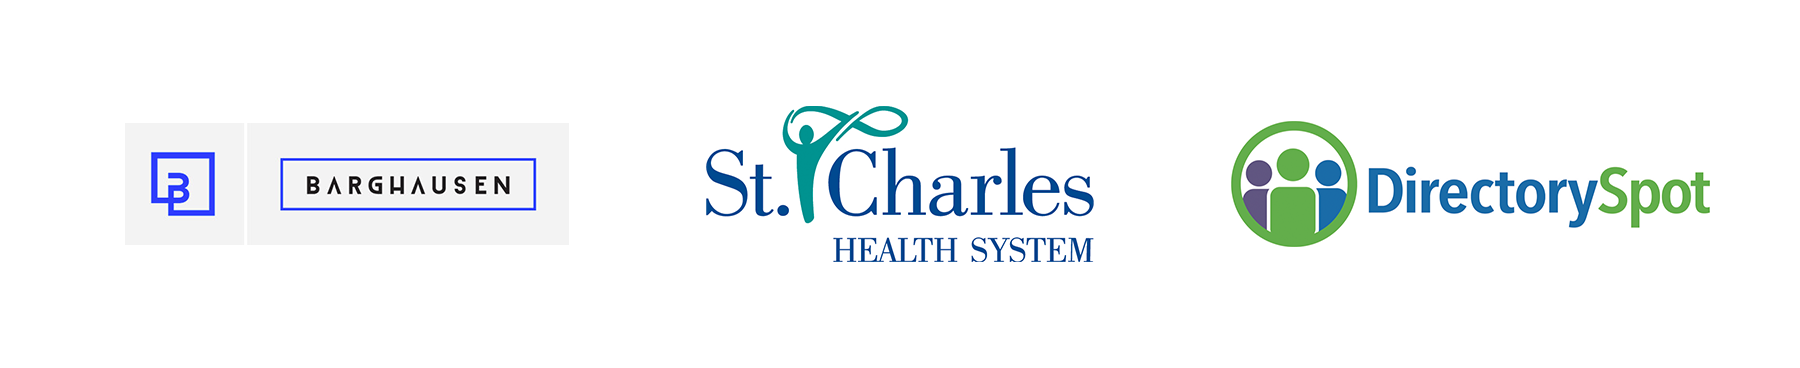 Barghausen Consulting, St Charles, Bend Anesthesiology logos